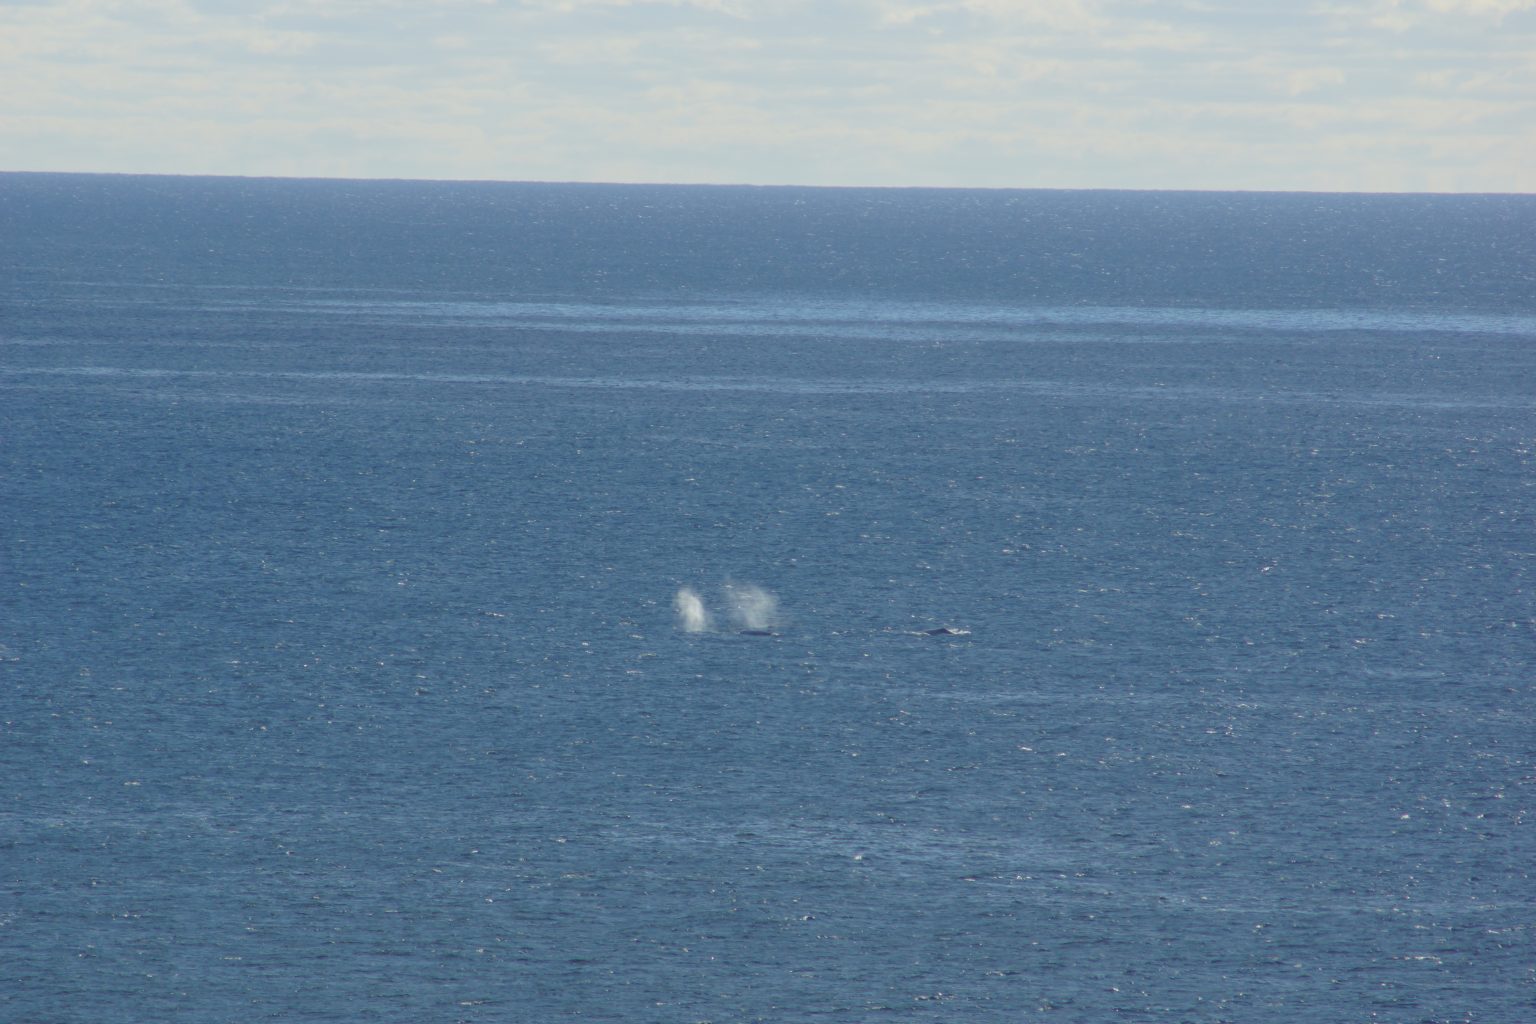 Whales breathing in the Pacific. 2015-Dec 27th